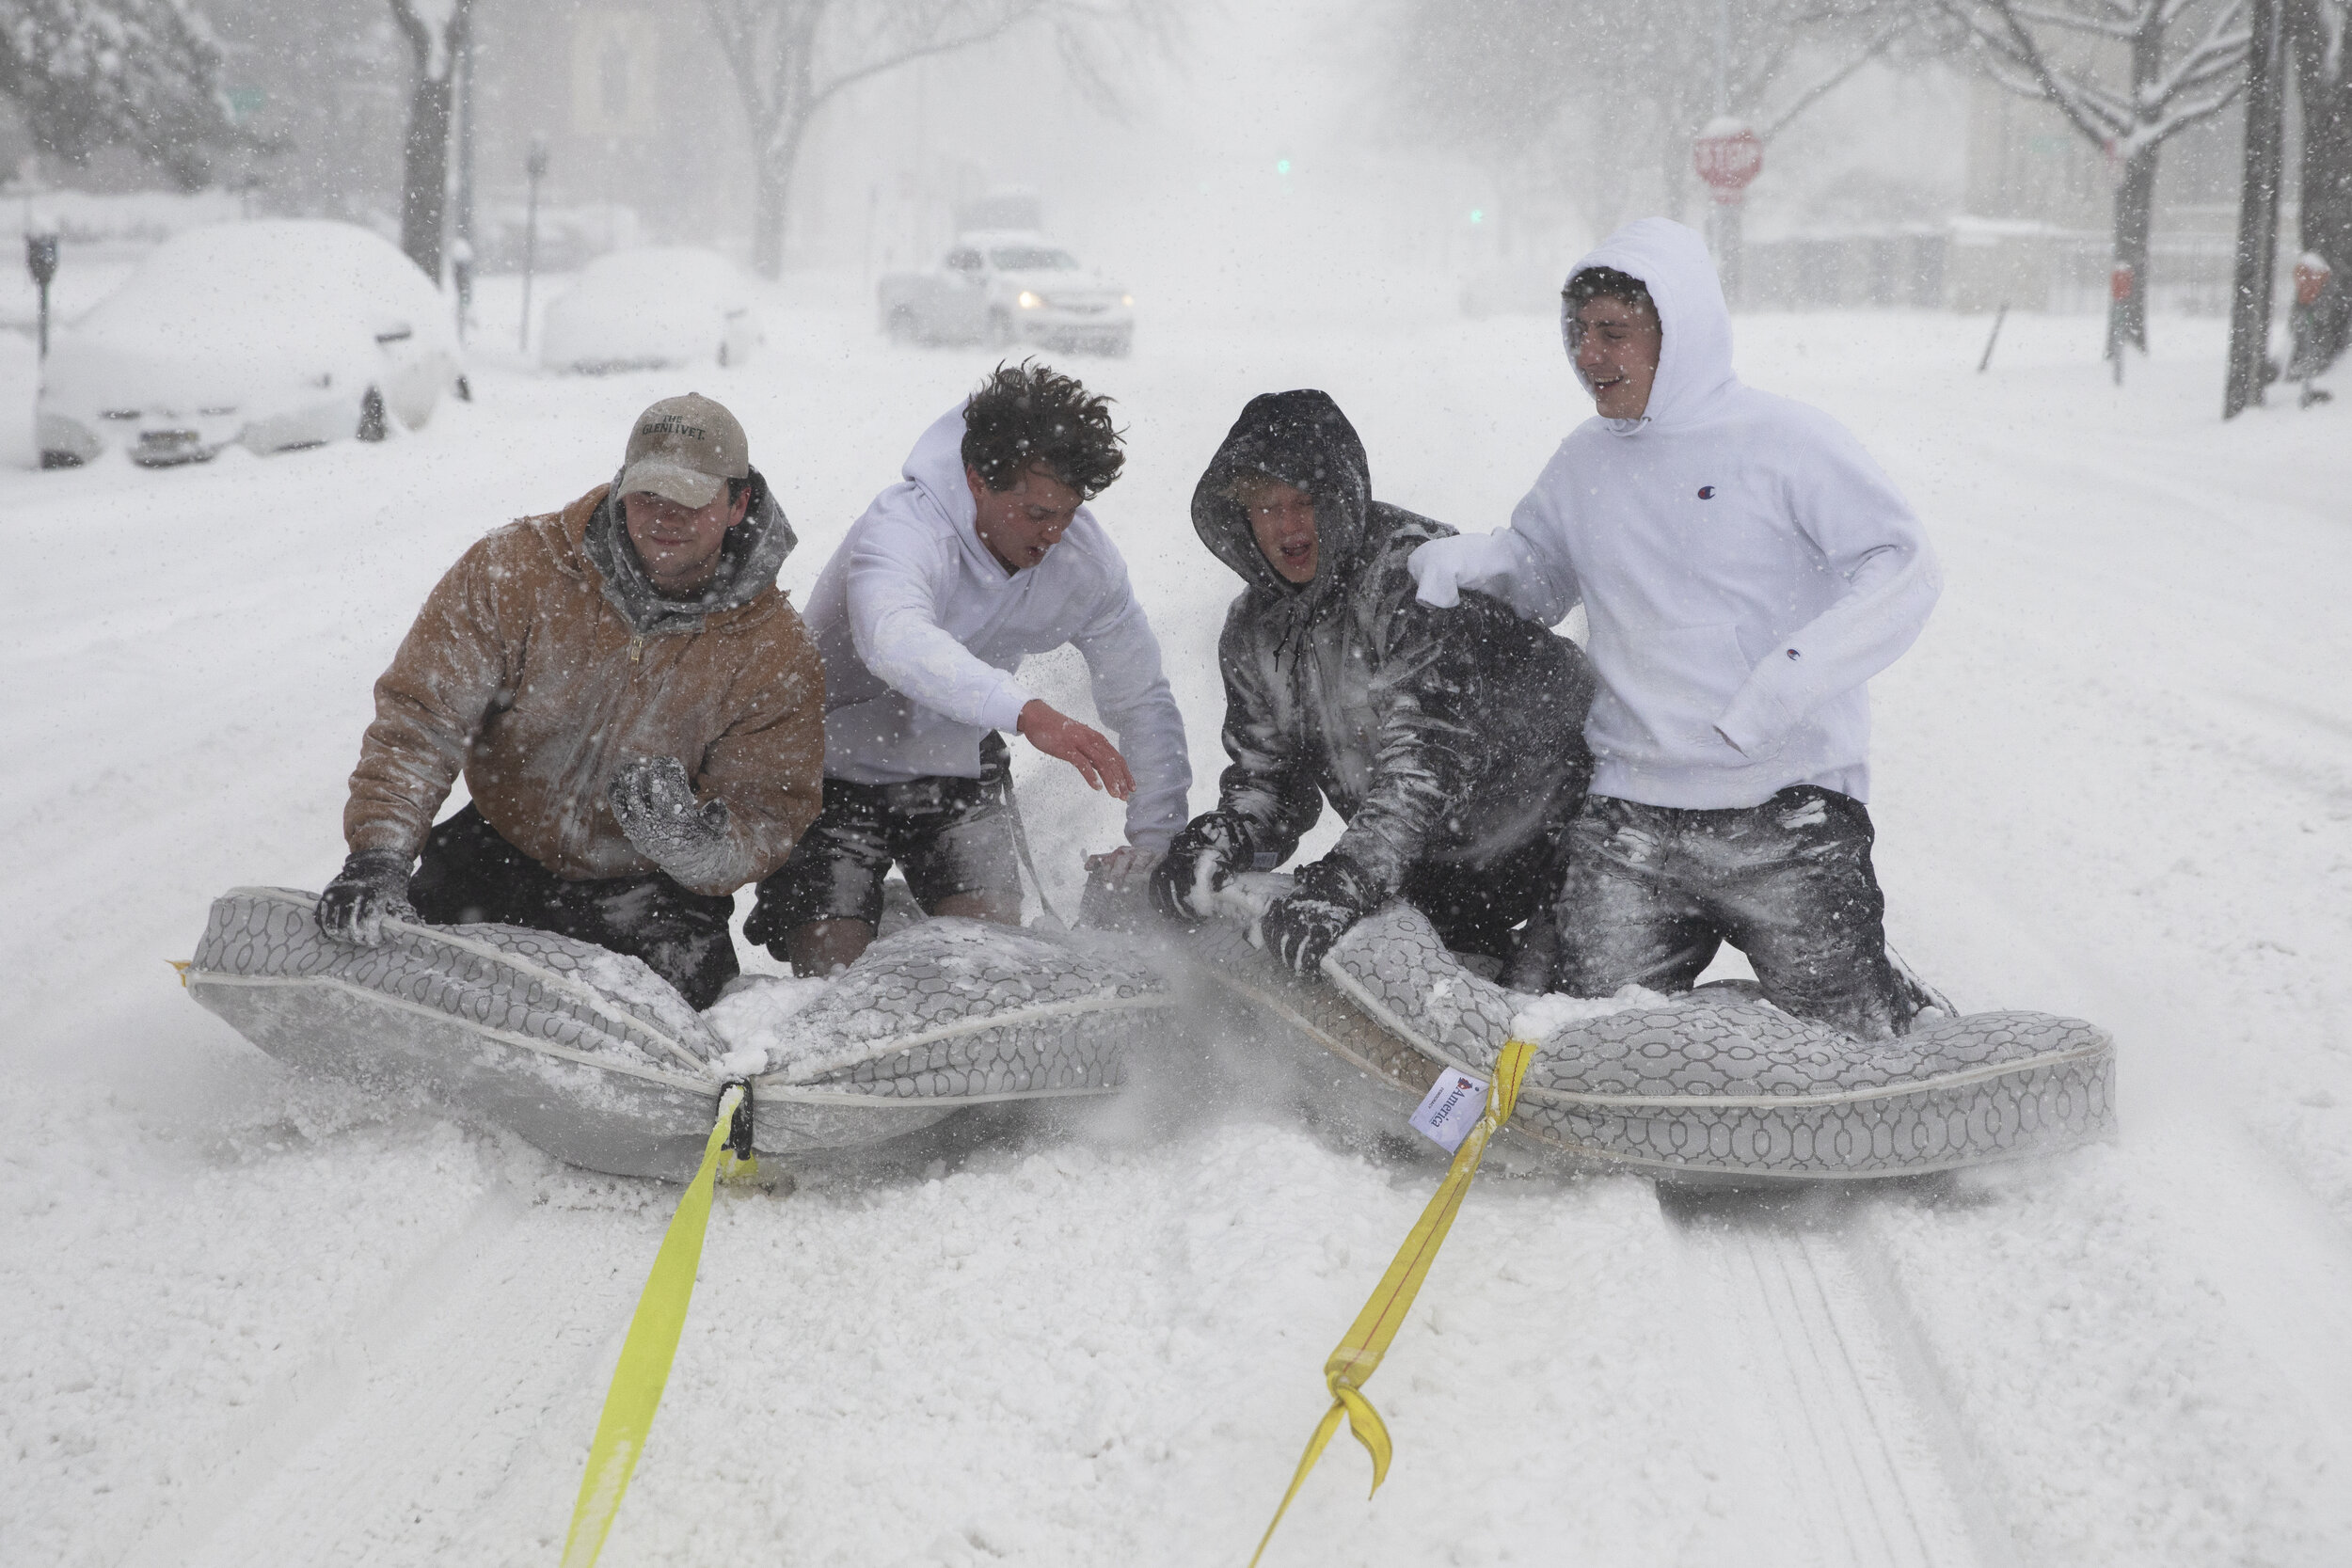  Brothers of the Phi Gamma Delta Fraternity use a pickup truck to pull their friends on mattresses through UNL’s campus during a winter storm in downtown Lincoln on Monday, January 25, 2021. The National Weather Service called it "historic" and "the 